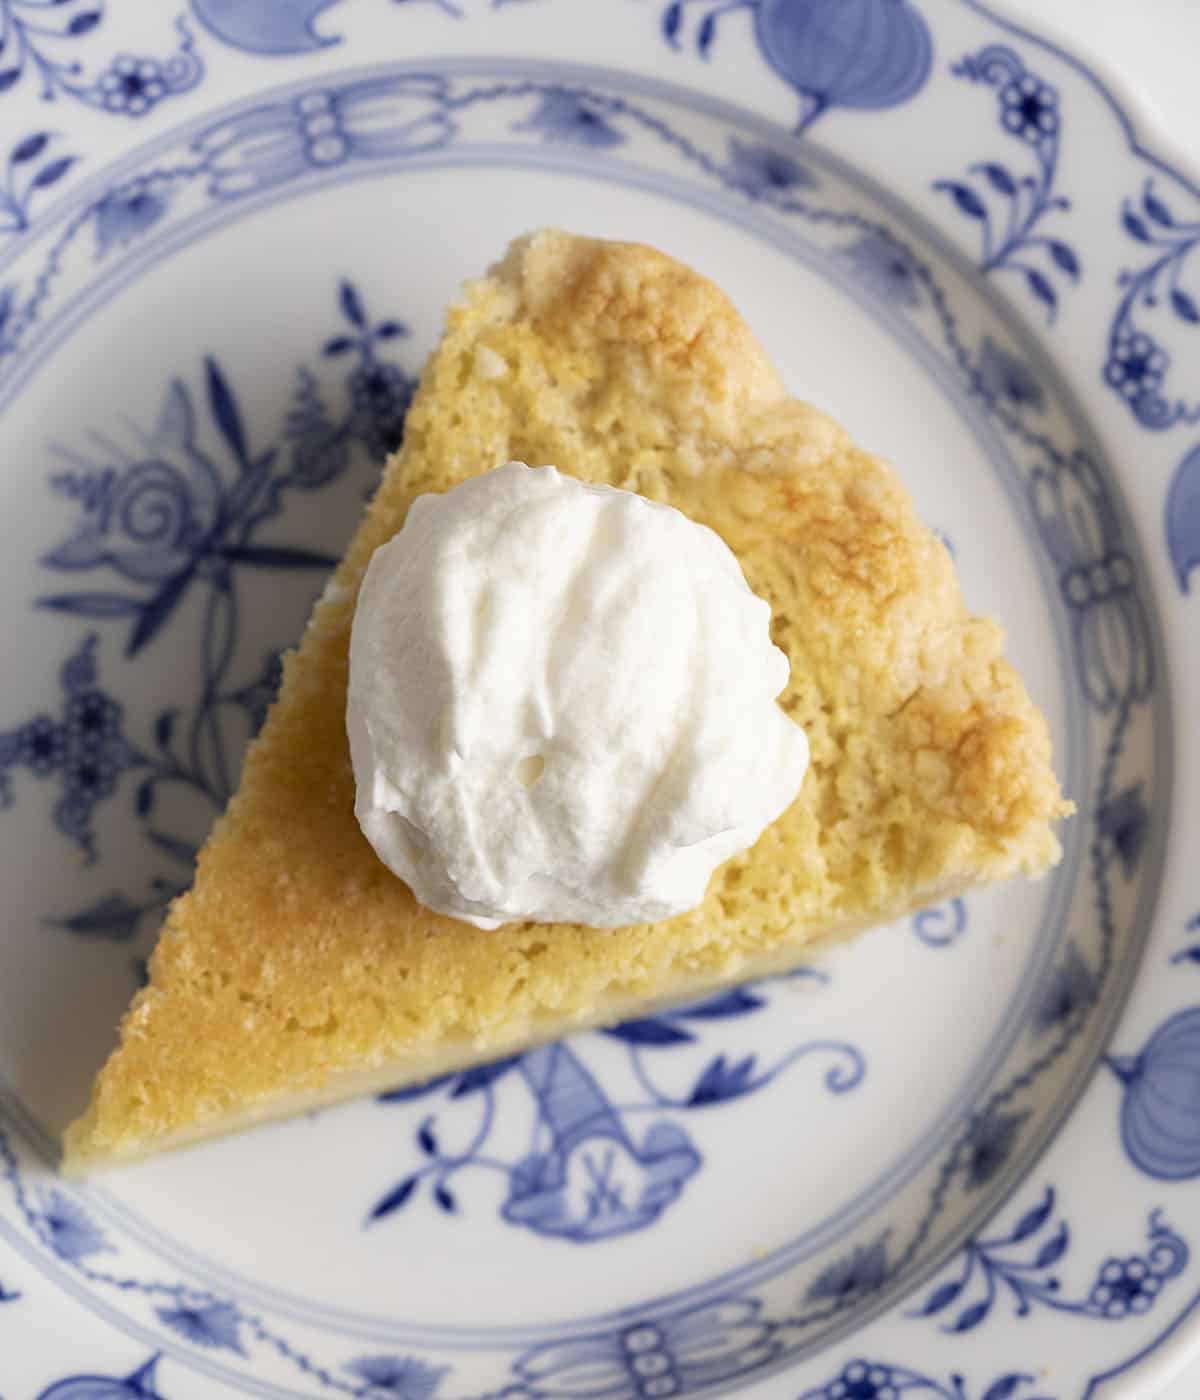 A piece of buttermilk pie topped with whipped cream on a porcelain plate.